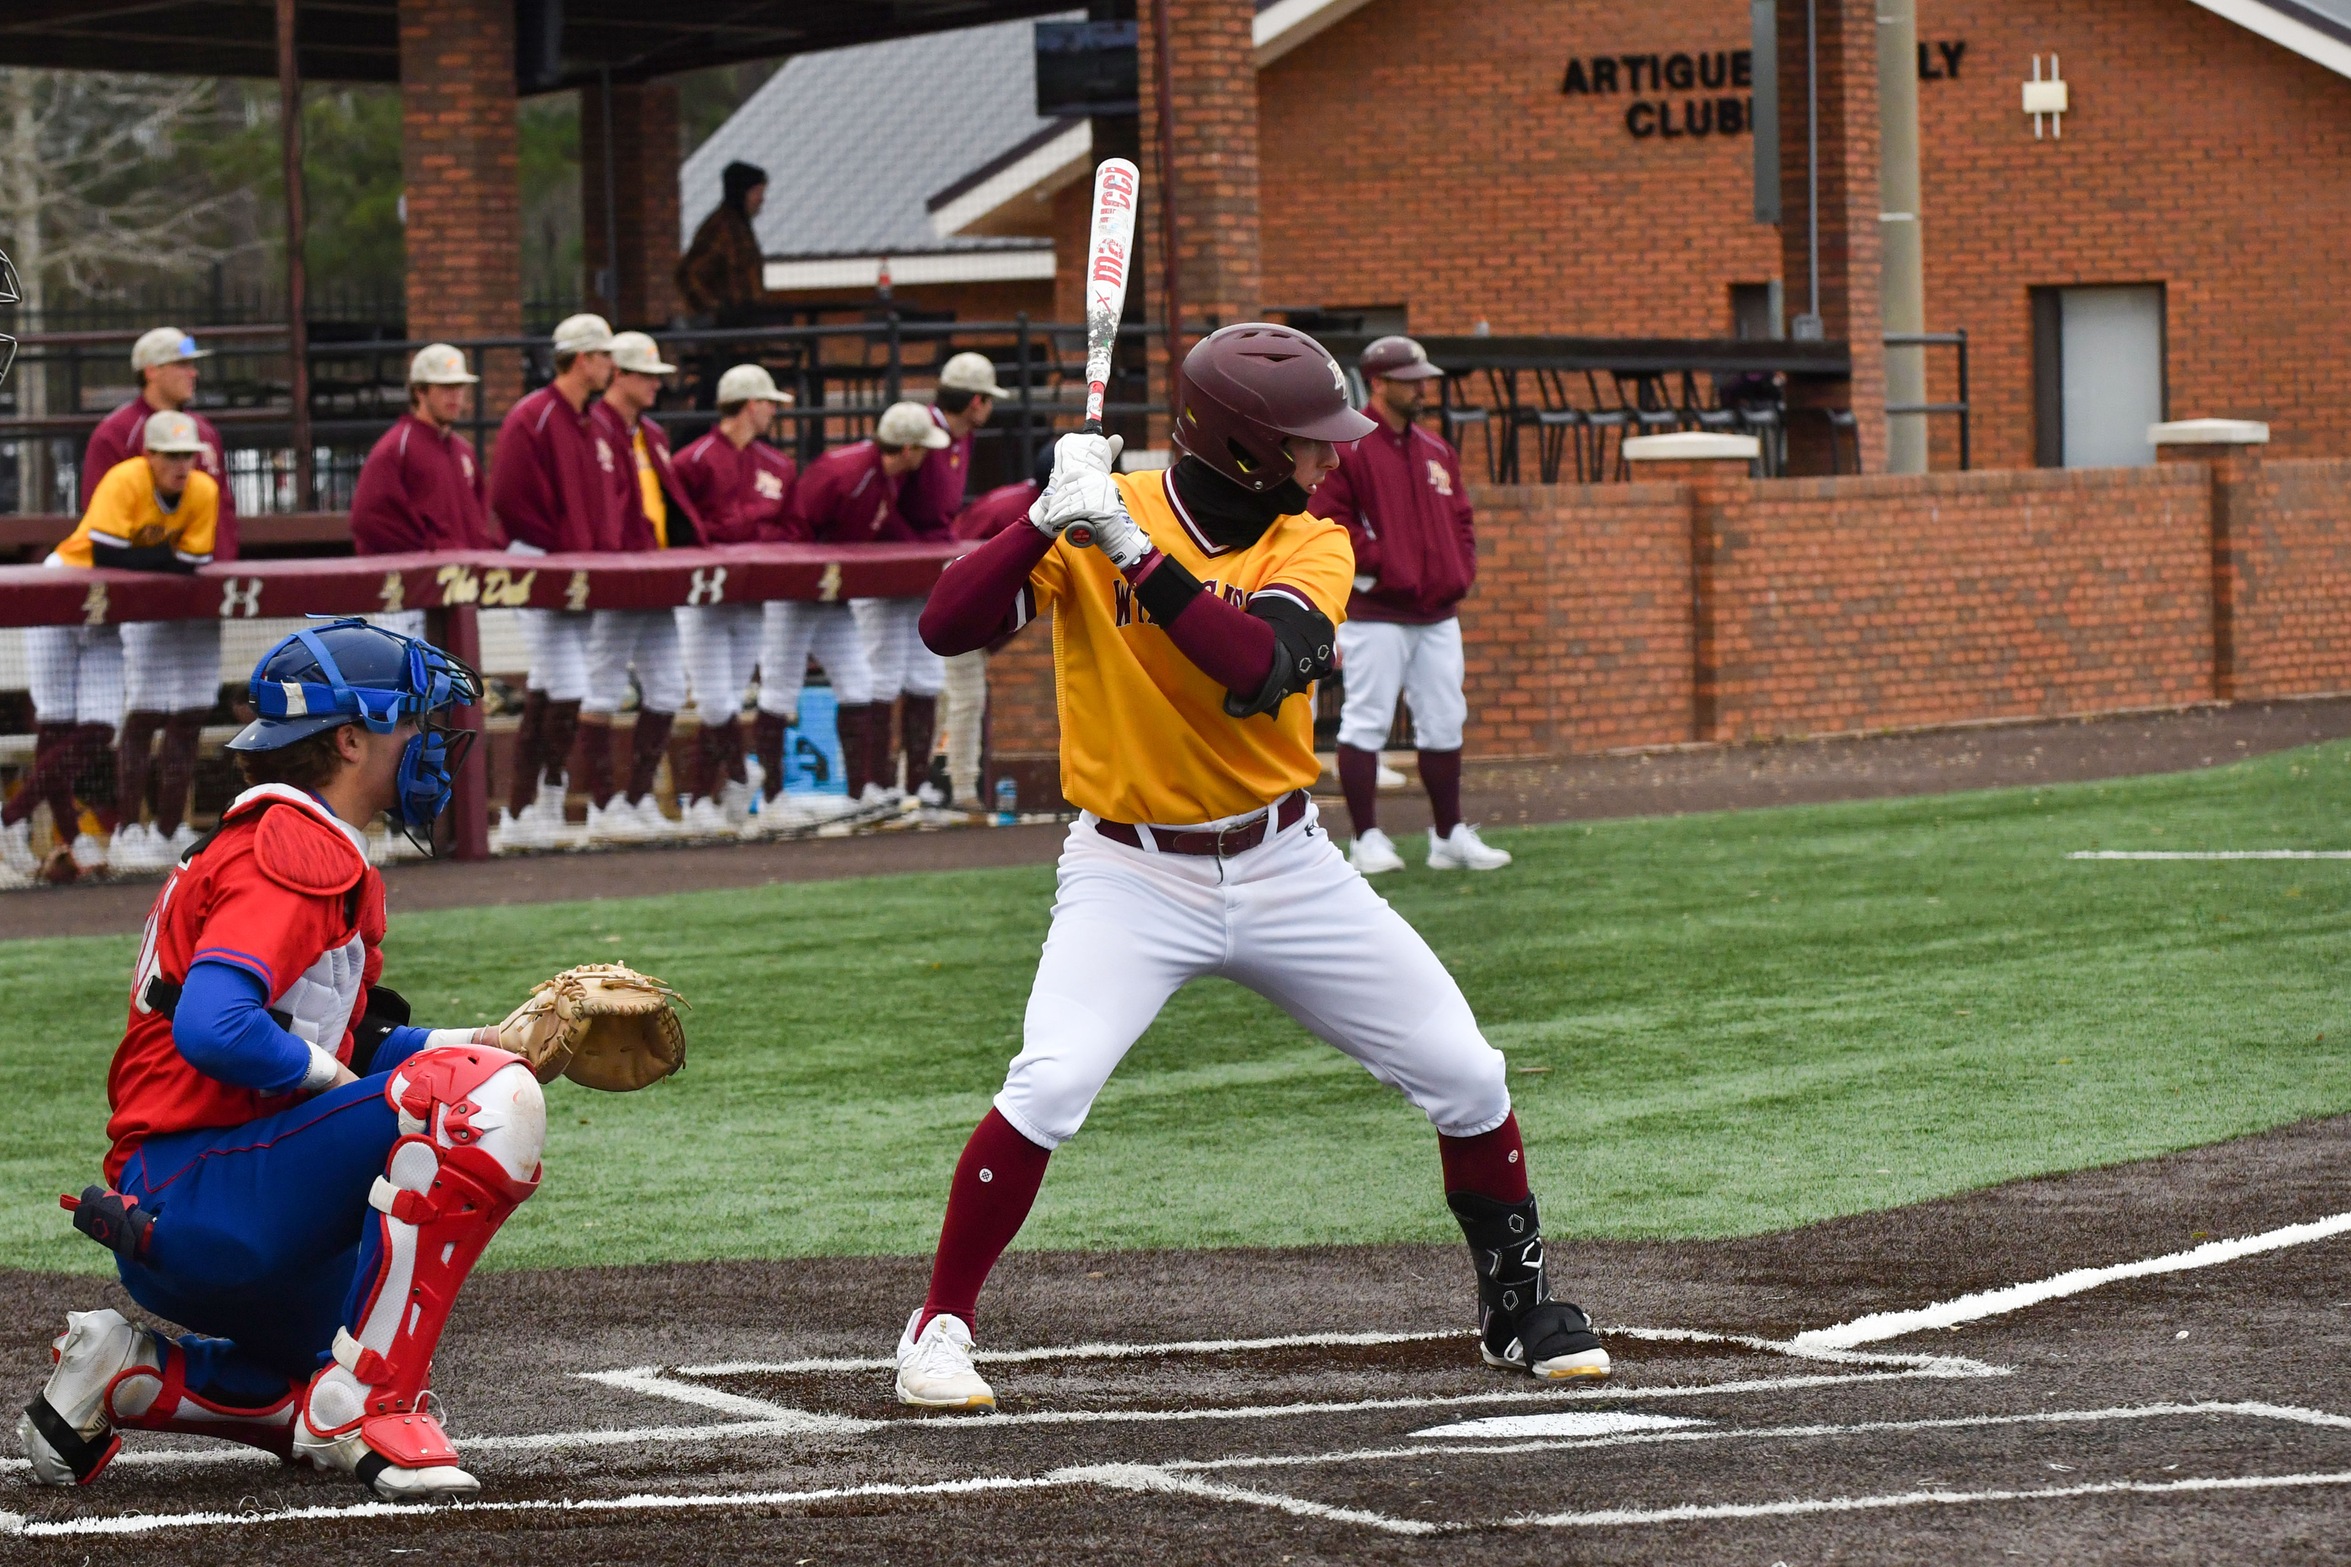 Miscues plague No. 3 Pearl River against Murray State